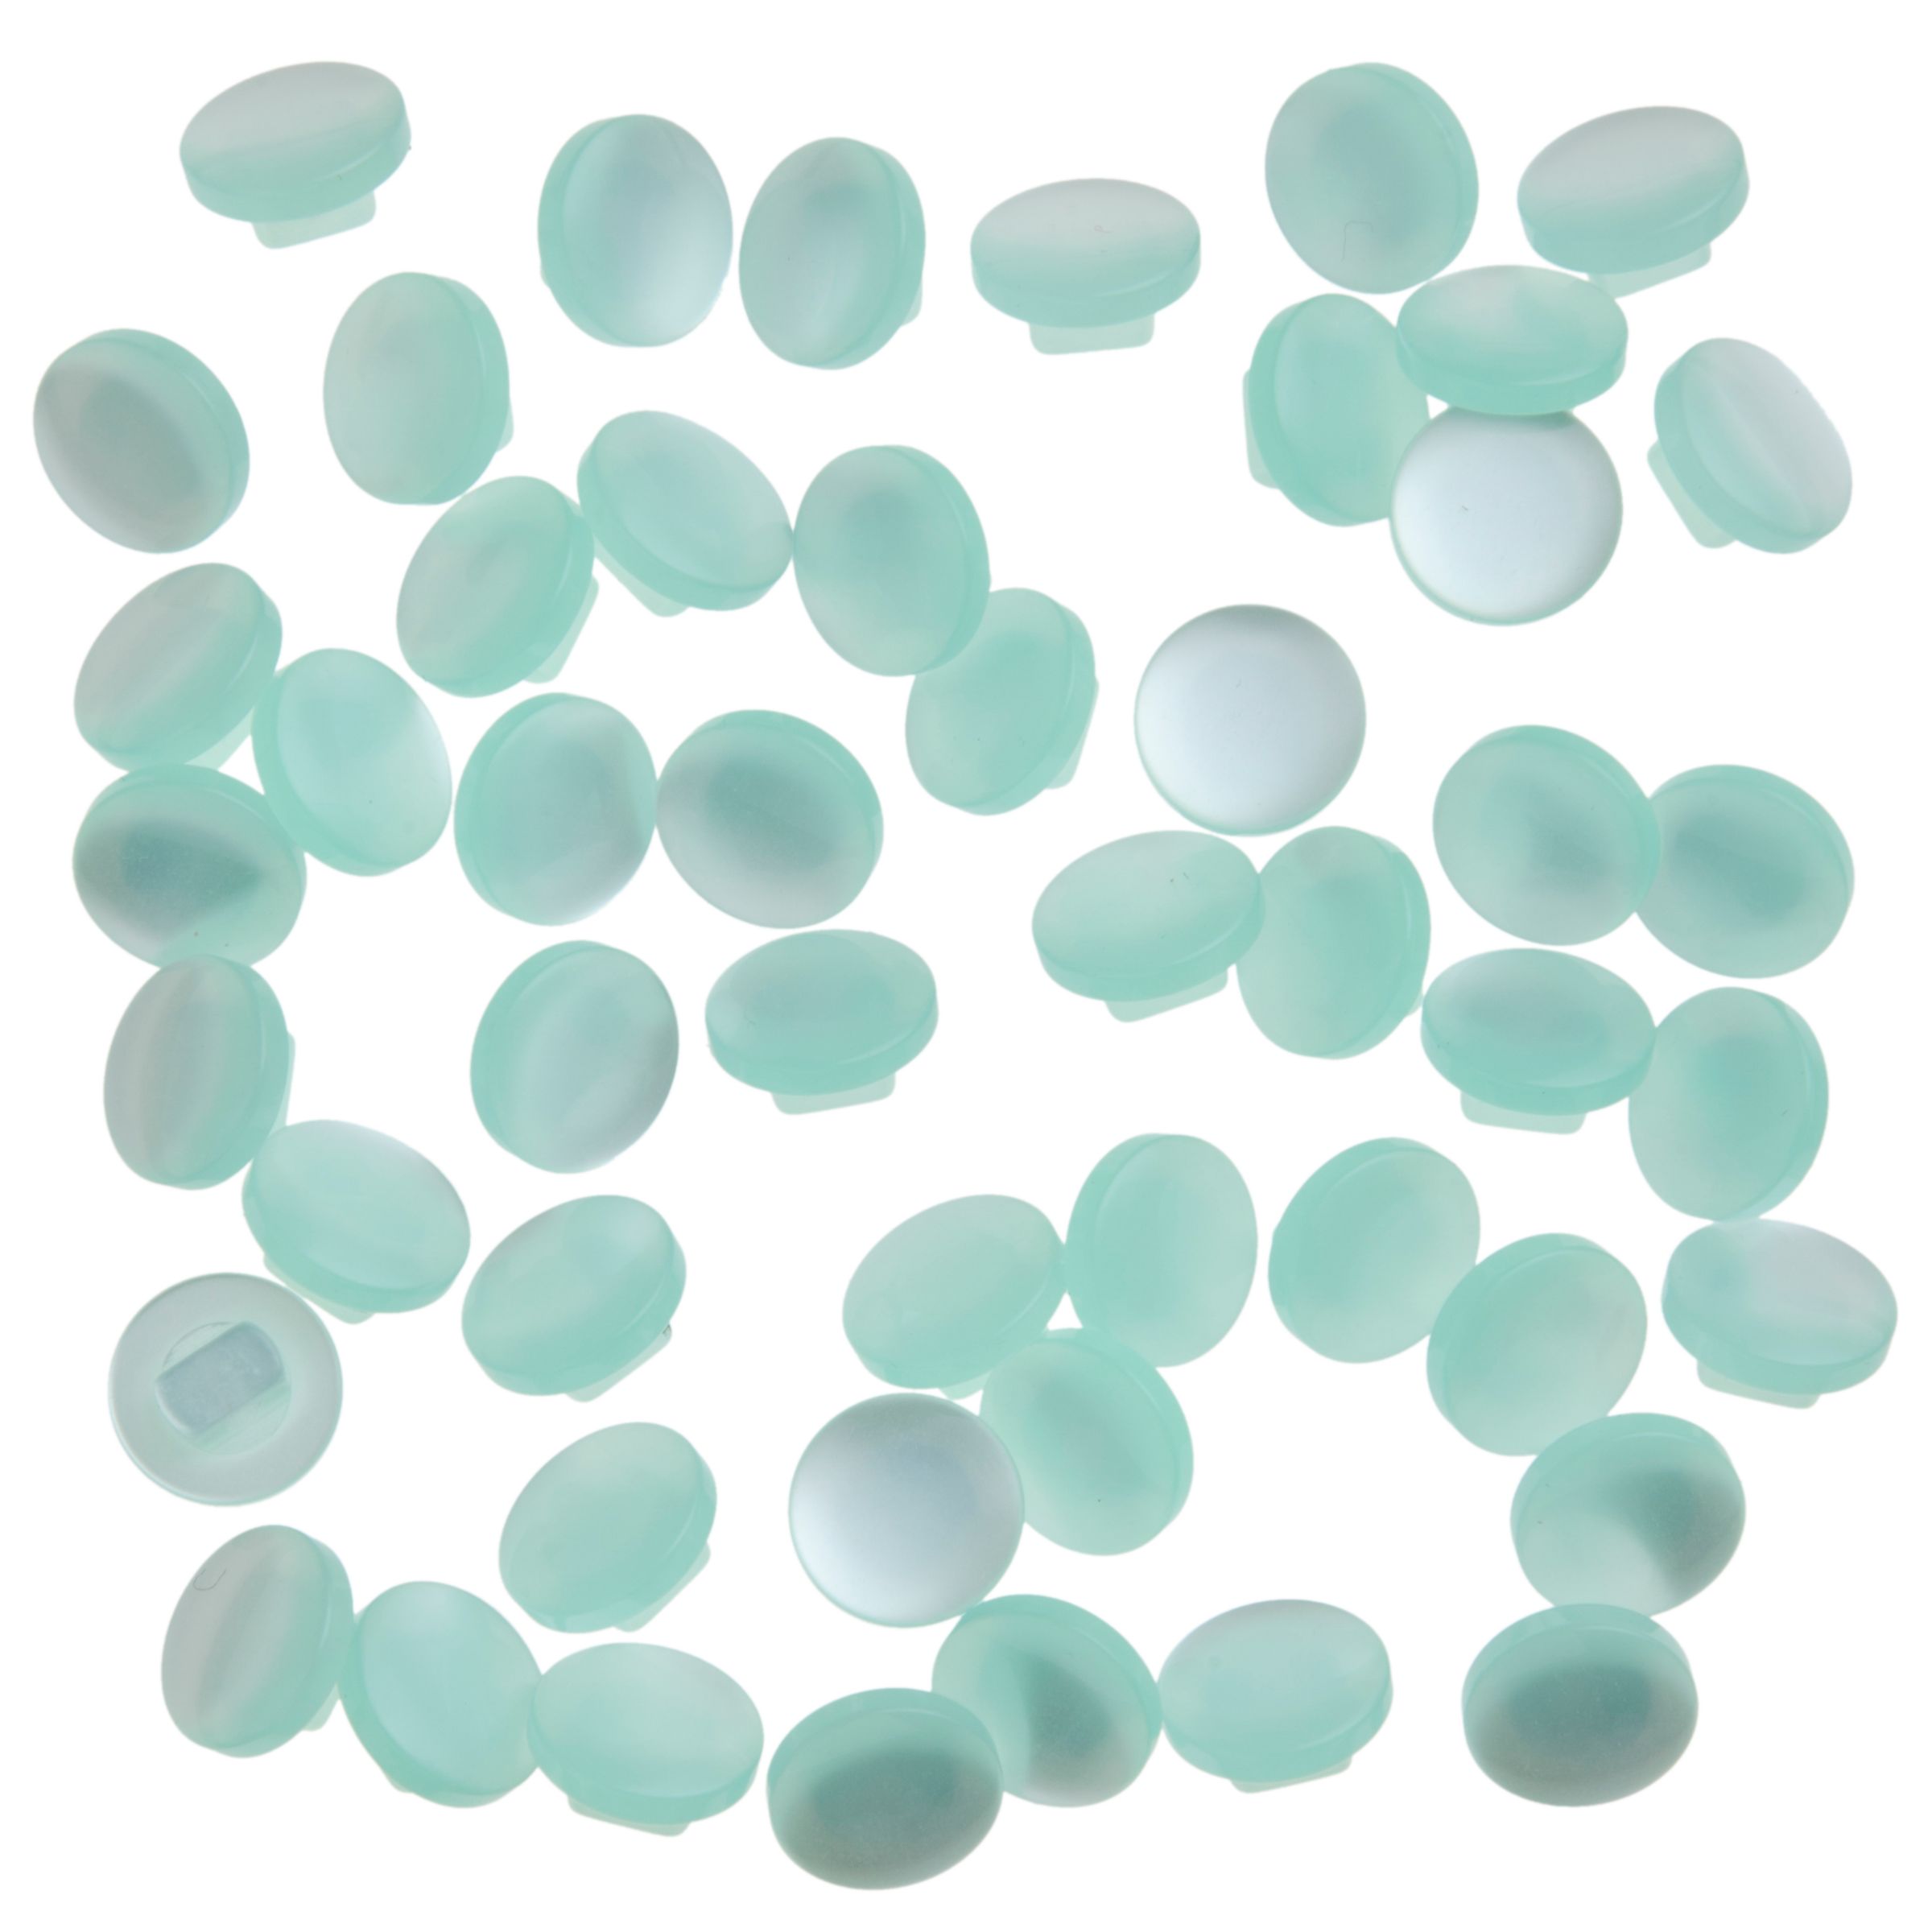 John Lewis Pearlised Shank Buttons, 10mm, Pack of 50